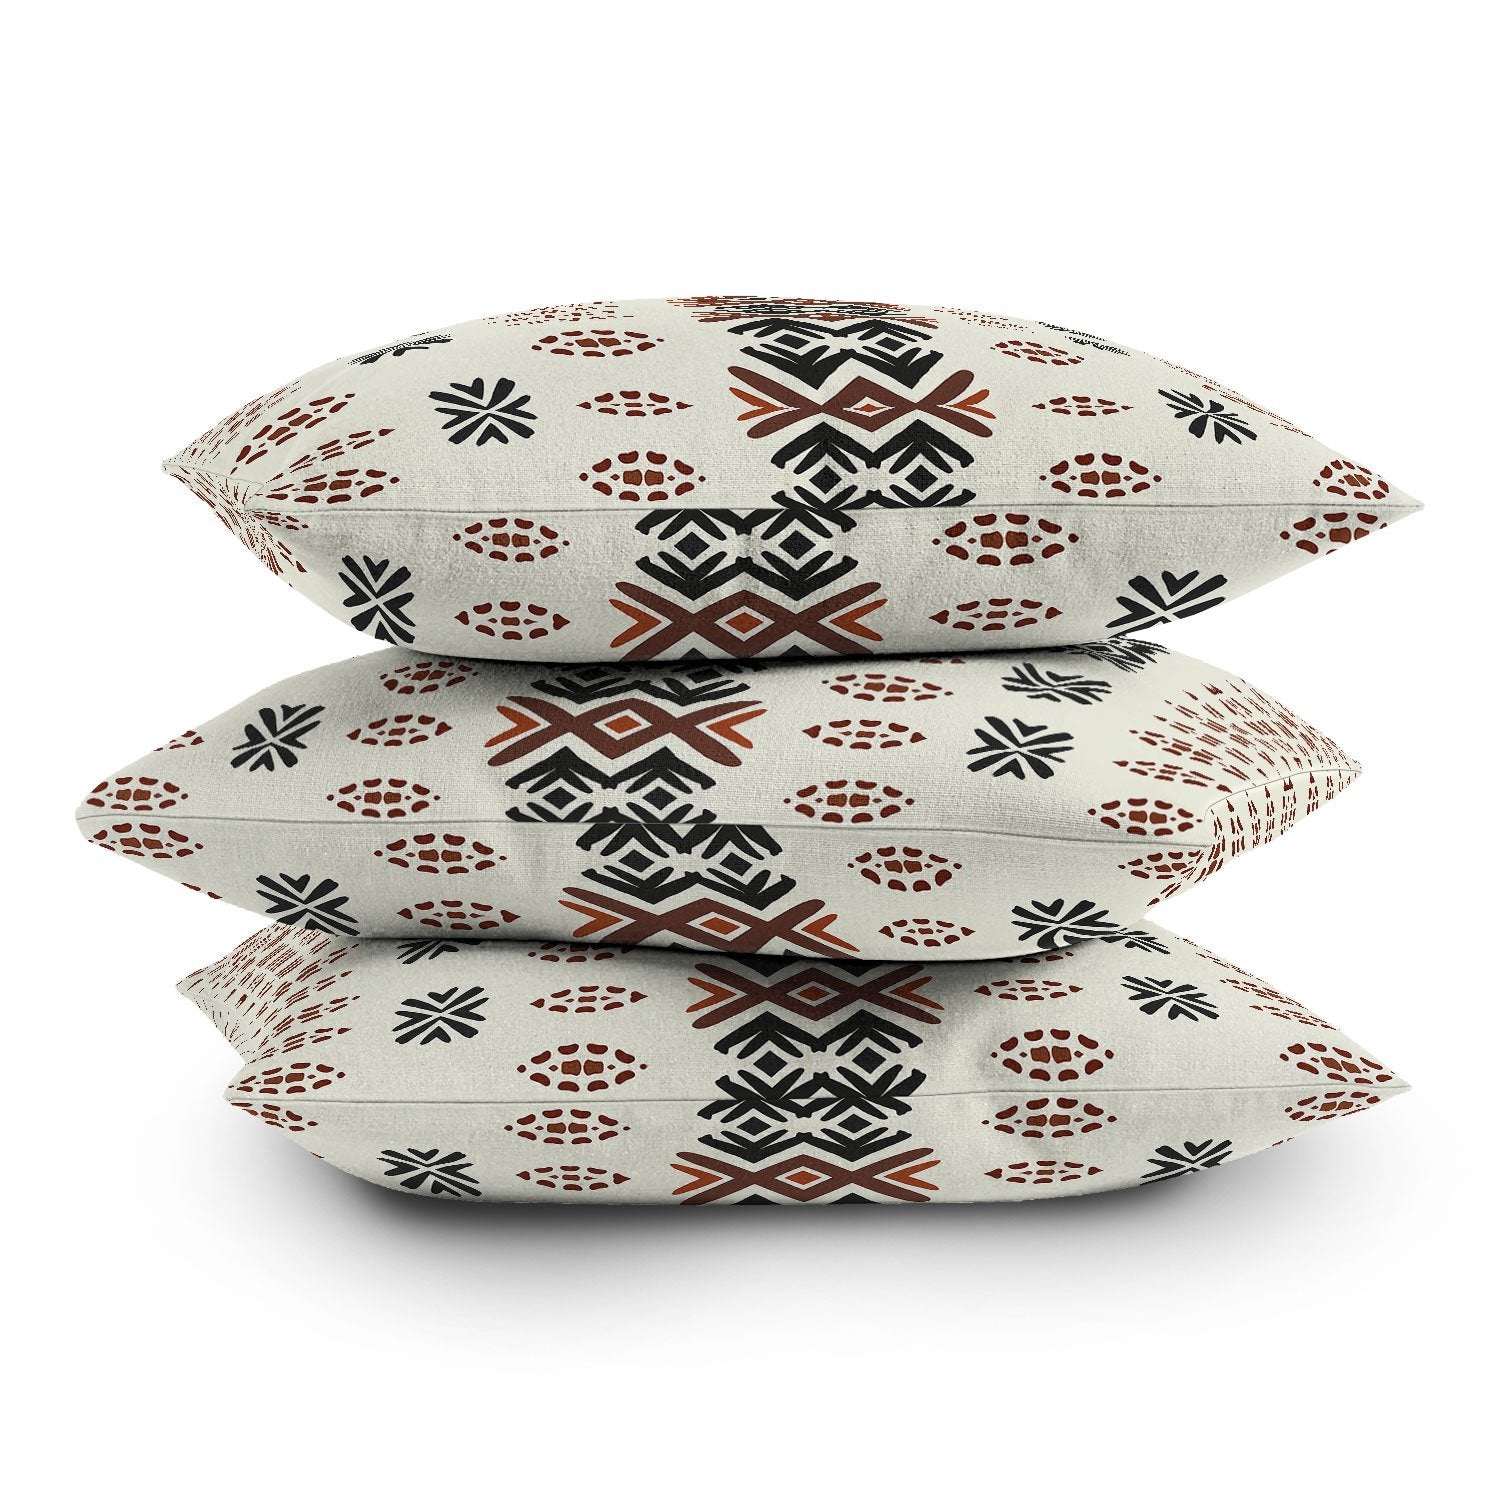 Ole Western Tribal Indoor / Outdoor Throw Pillows (DS)